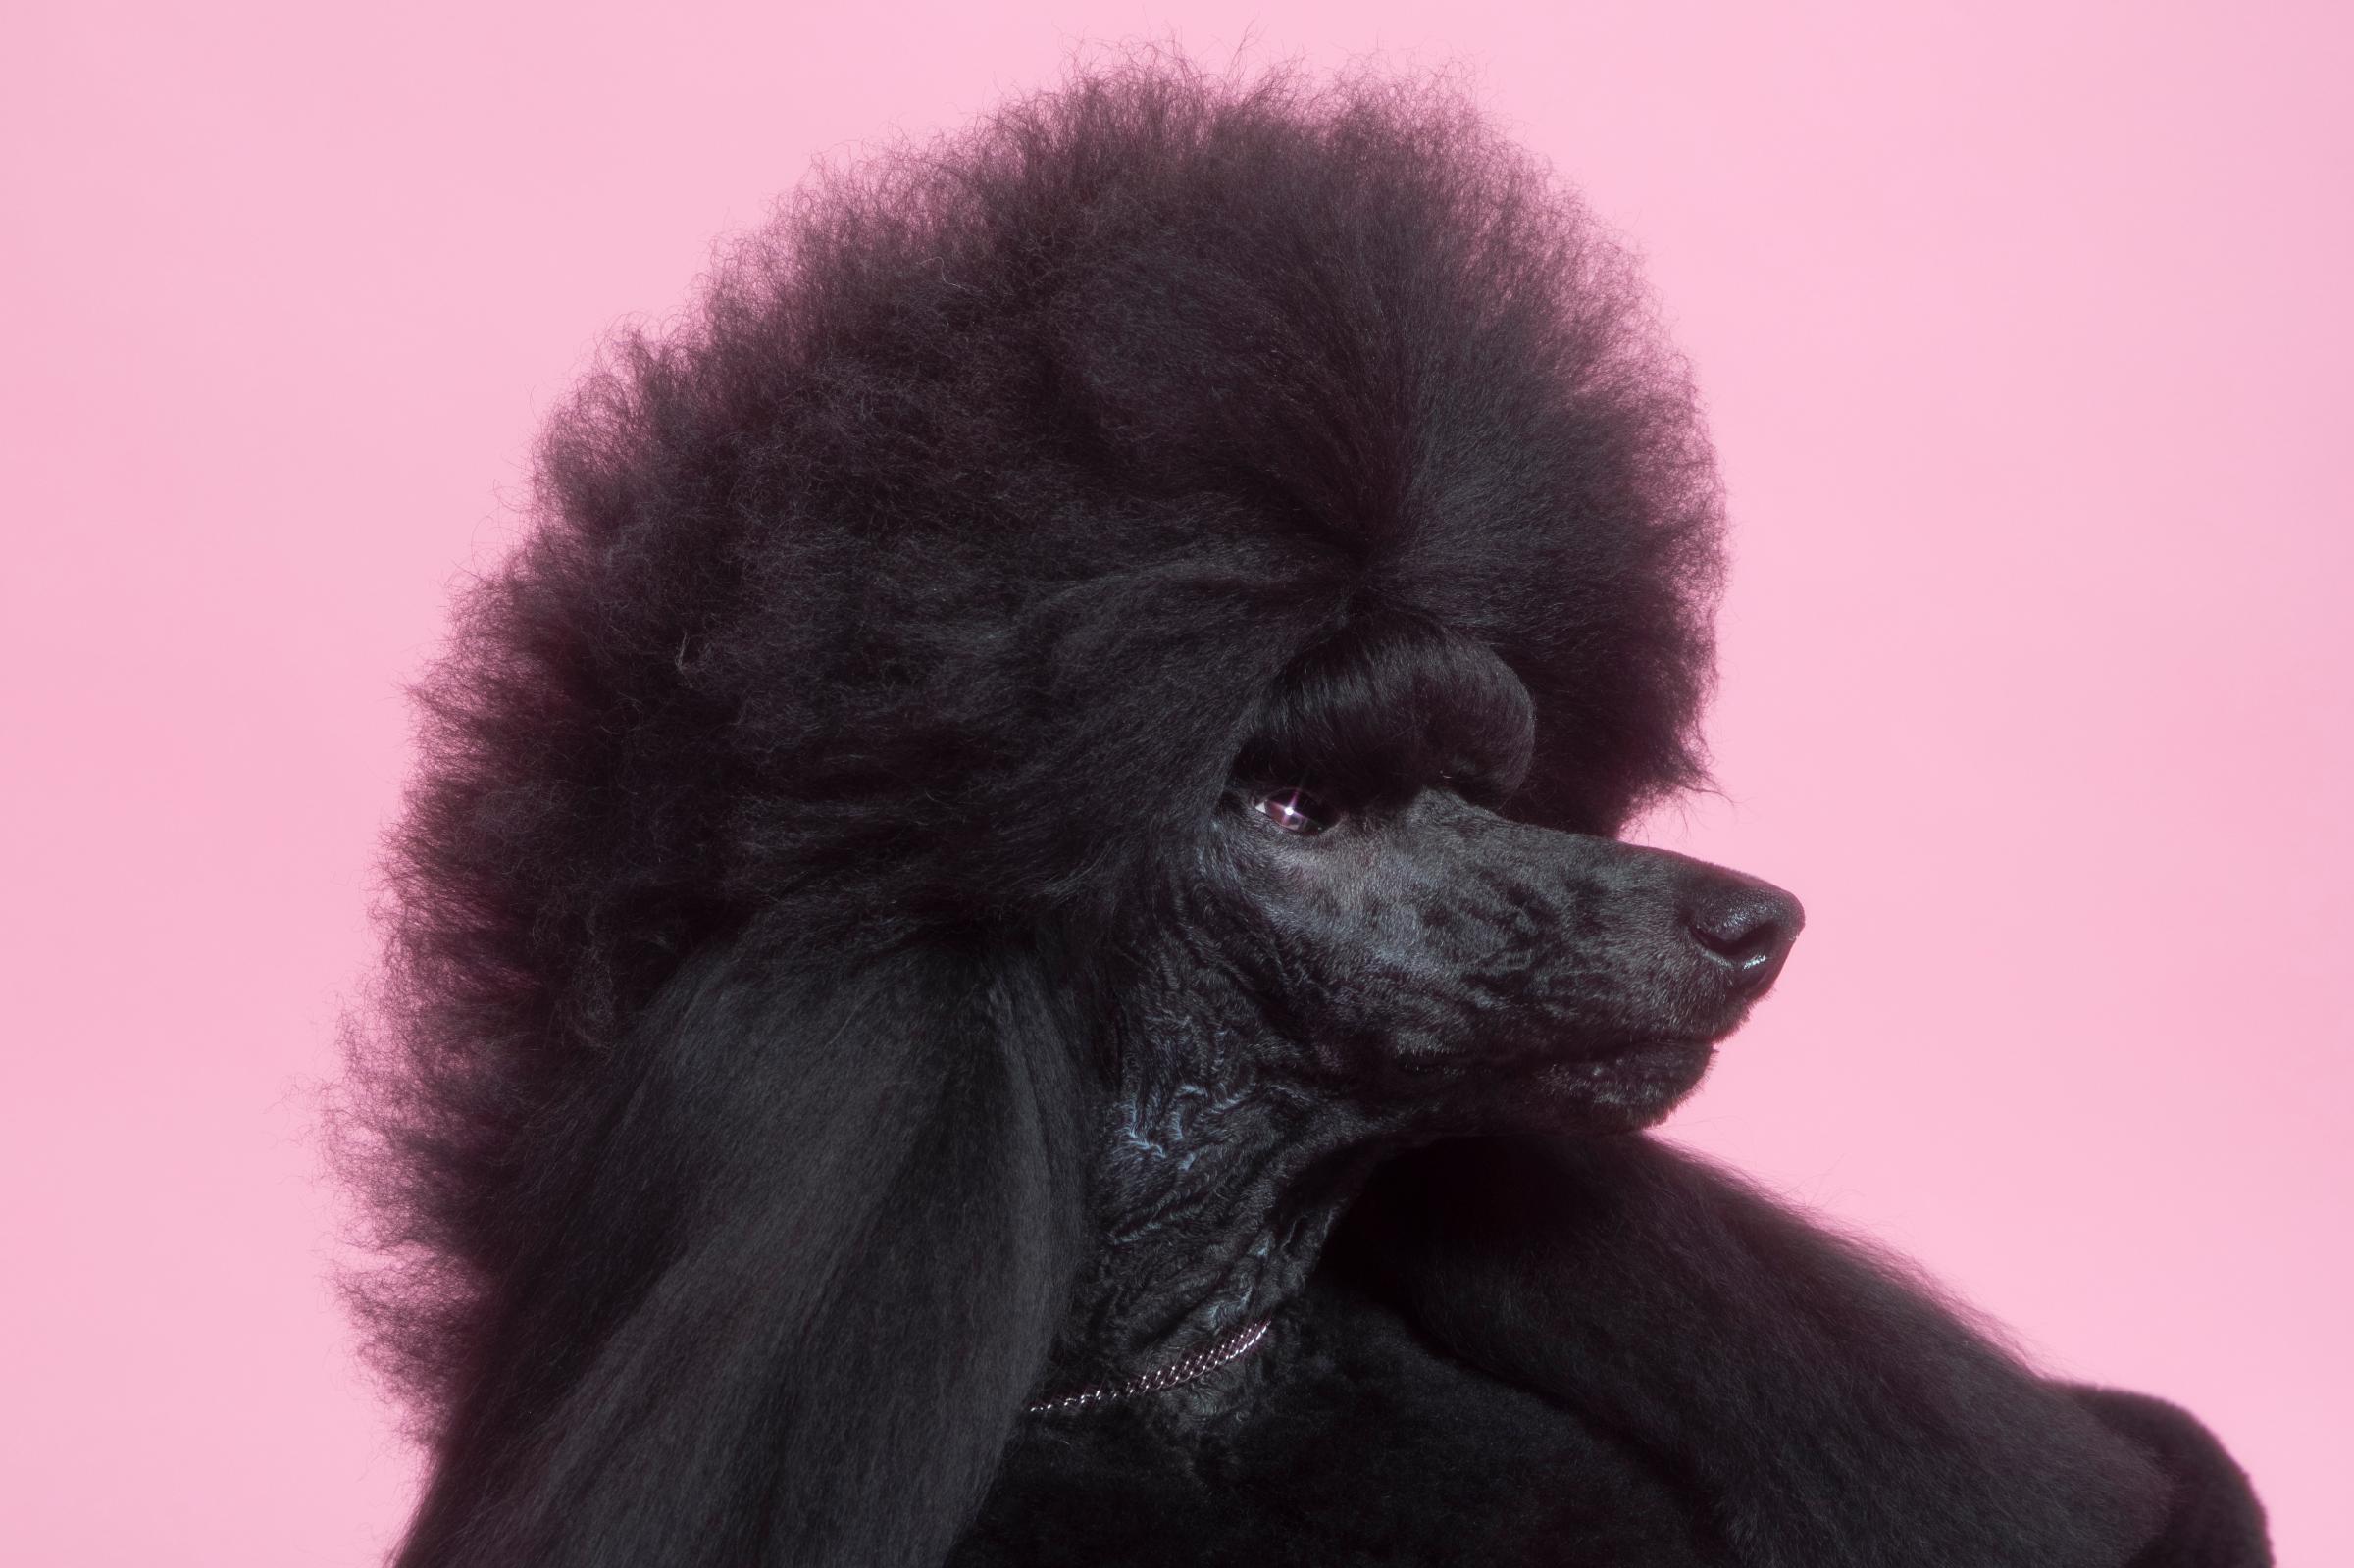 Siba the Standard Poodle poses at the TIME studio on Feb. 12. She won the Westminster Dog Show the day prior.